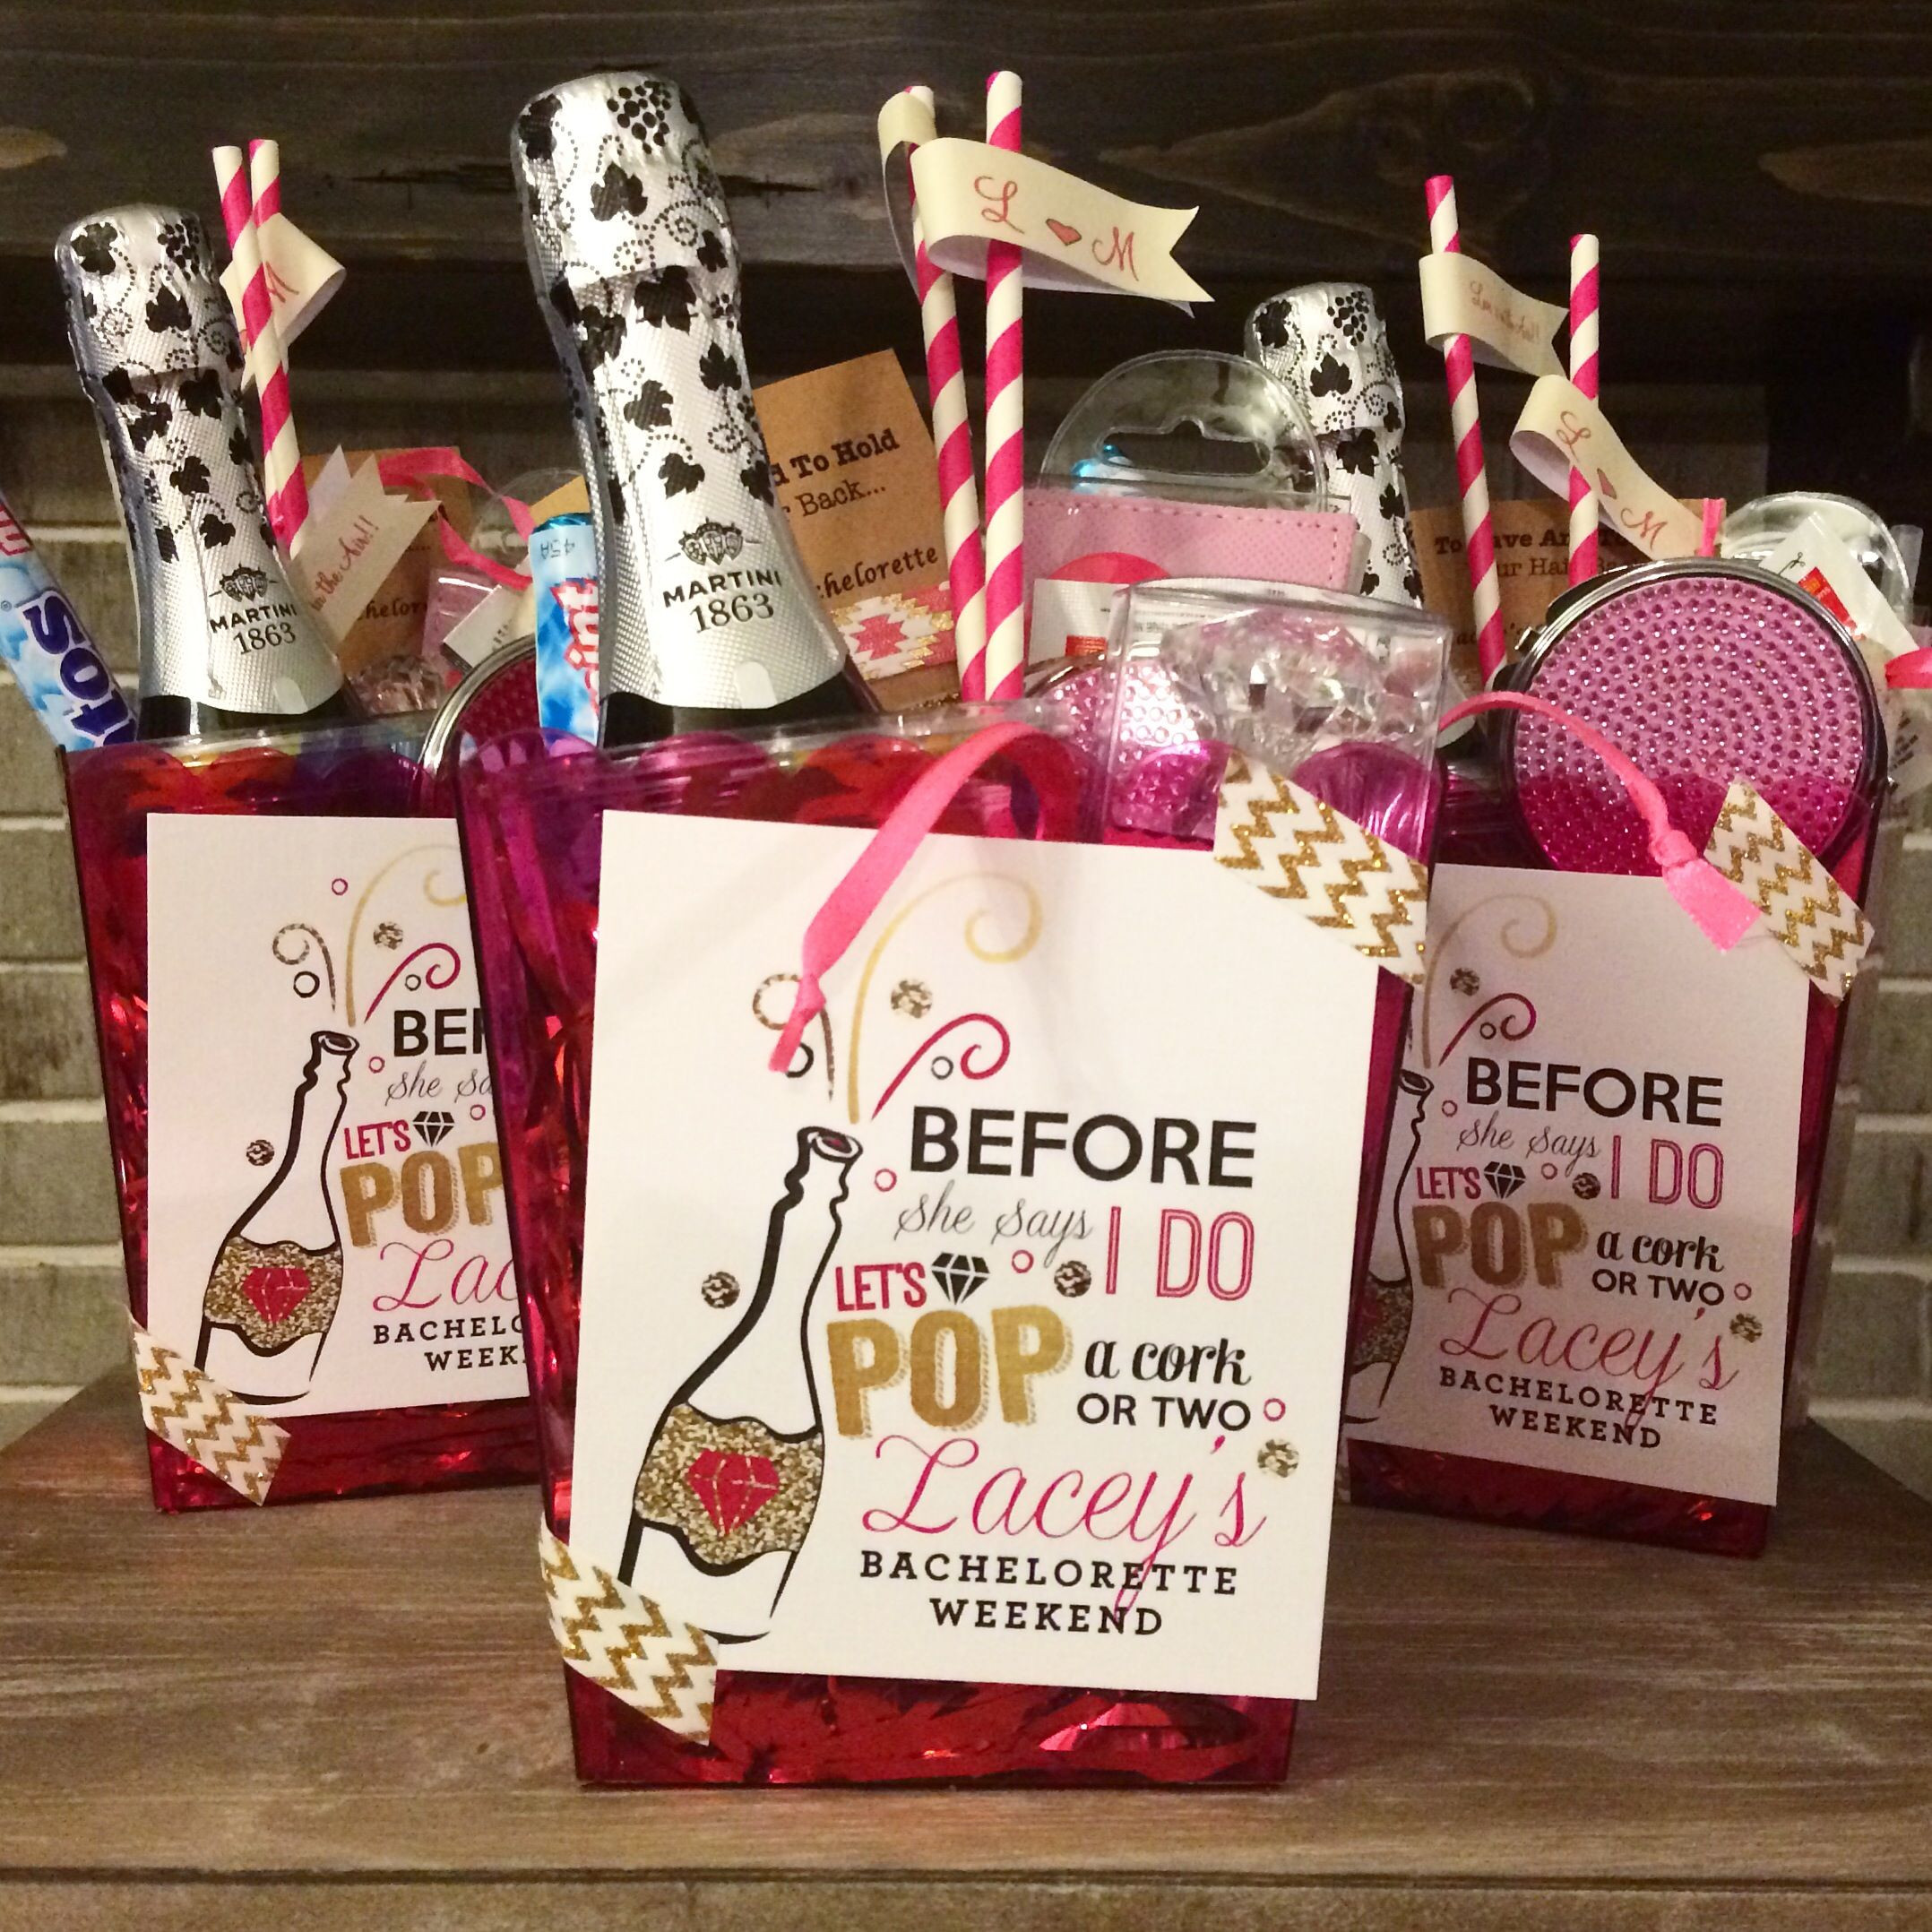 Weekend Bachelorette Party Ideas
 Before she says I do let s pop a cork or two Custom